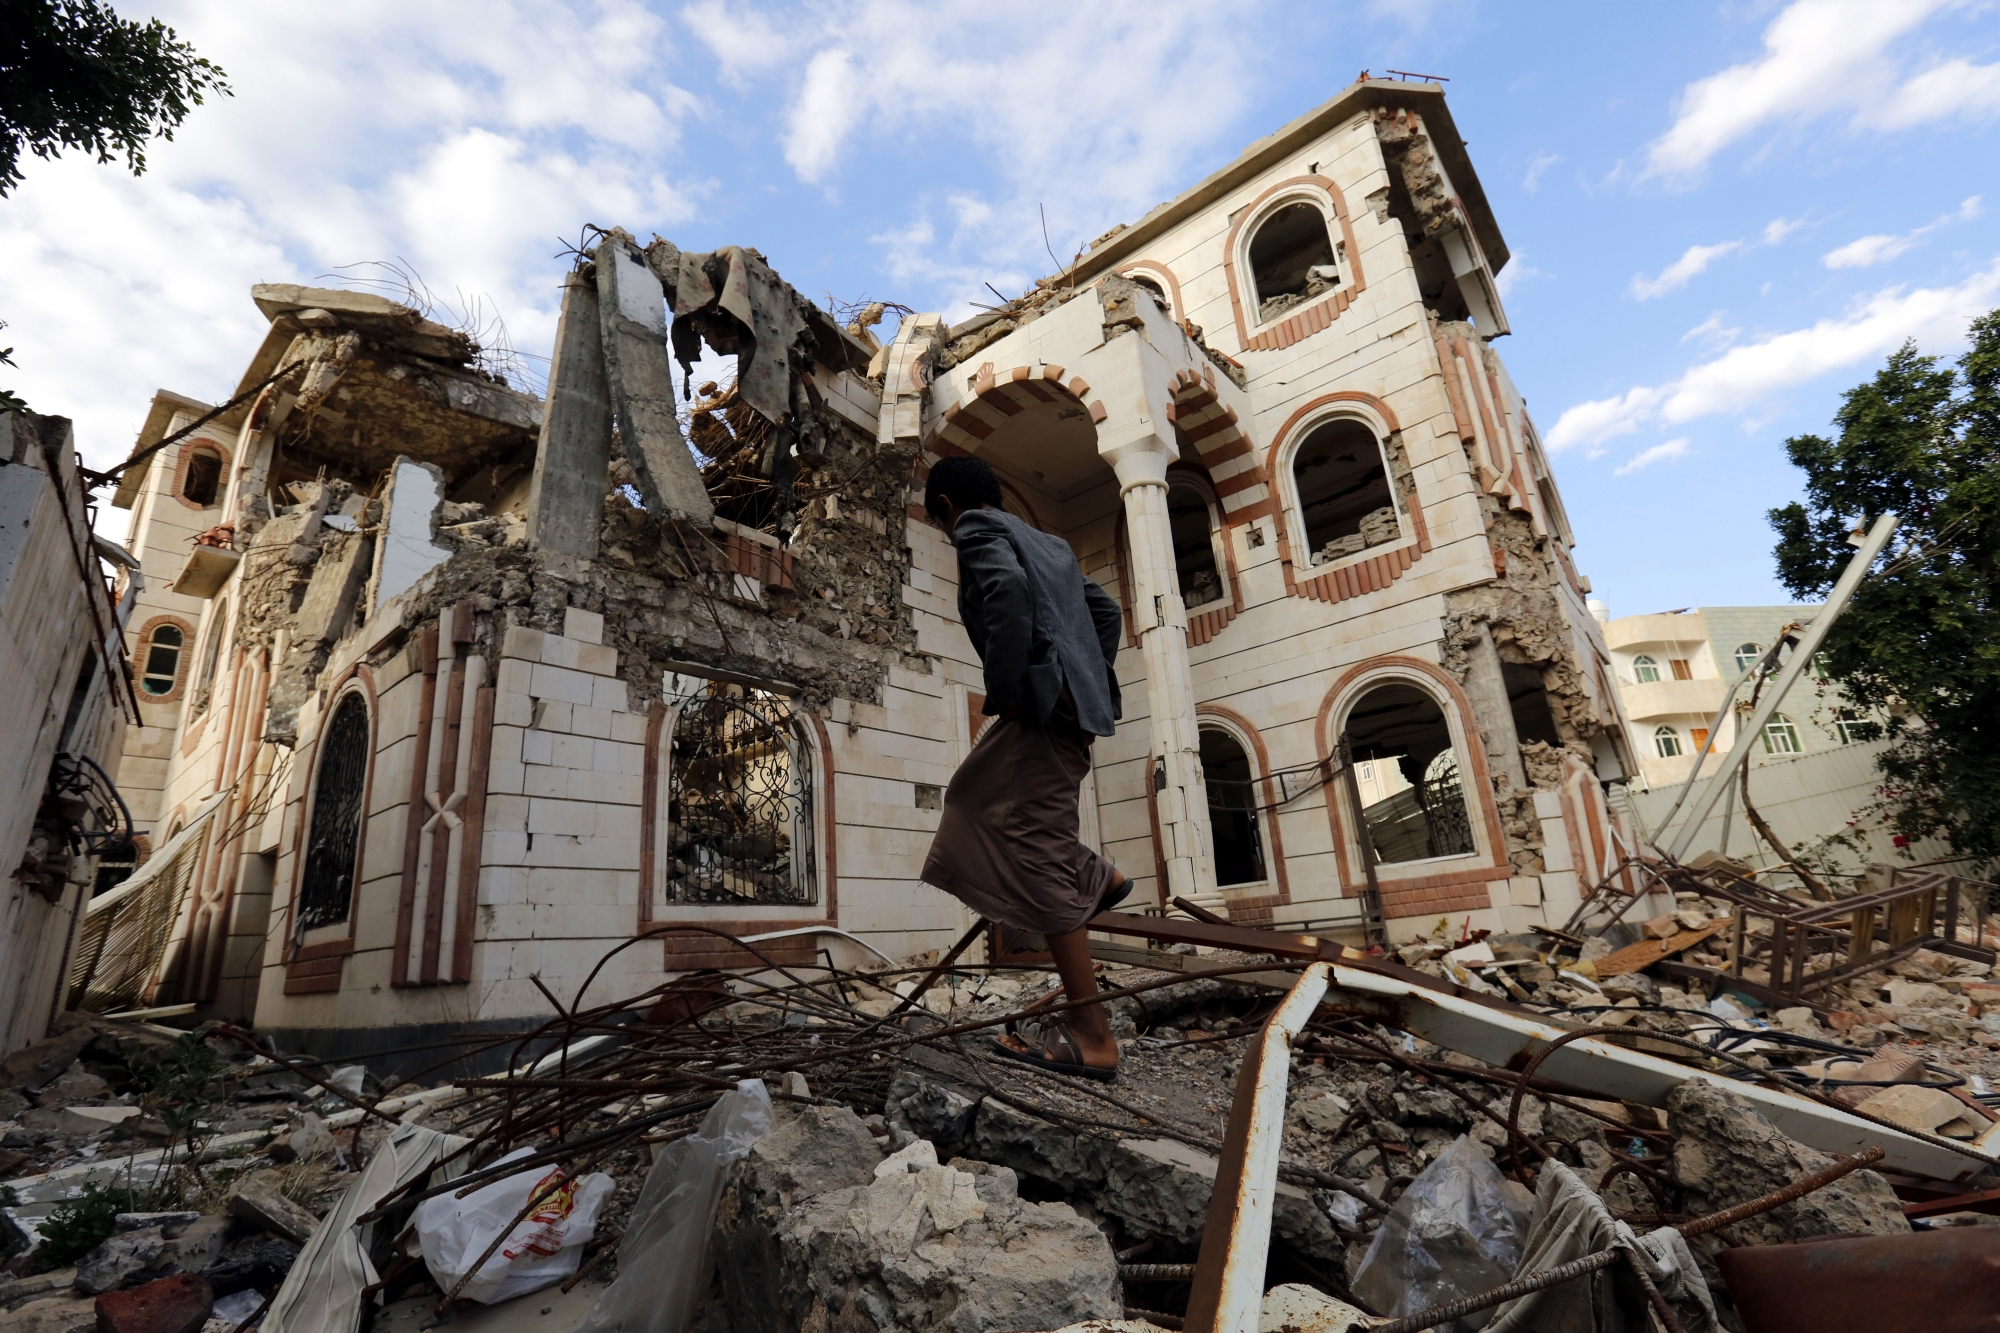 epa07135368 A Yemeni walks amongst debris of a destroyed building allegedly targeted by a previous Saudi-led airstrike, in Sana'a, Yemen, 01 November 2018. According to reports, the US has called for a ceasefire in Yemen and a return to UN-backed peace talks aimed at ending the three-and-half-year conflict between the Saudi-backed Yemeni government and the Houthi rebels.  EPA/YAHYA ARHAB YEMEN CONFLICT PEACE EFFORTS